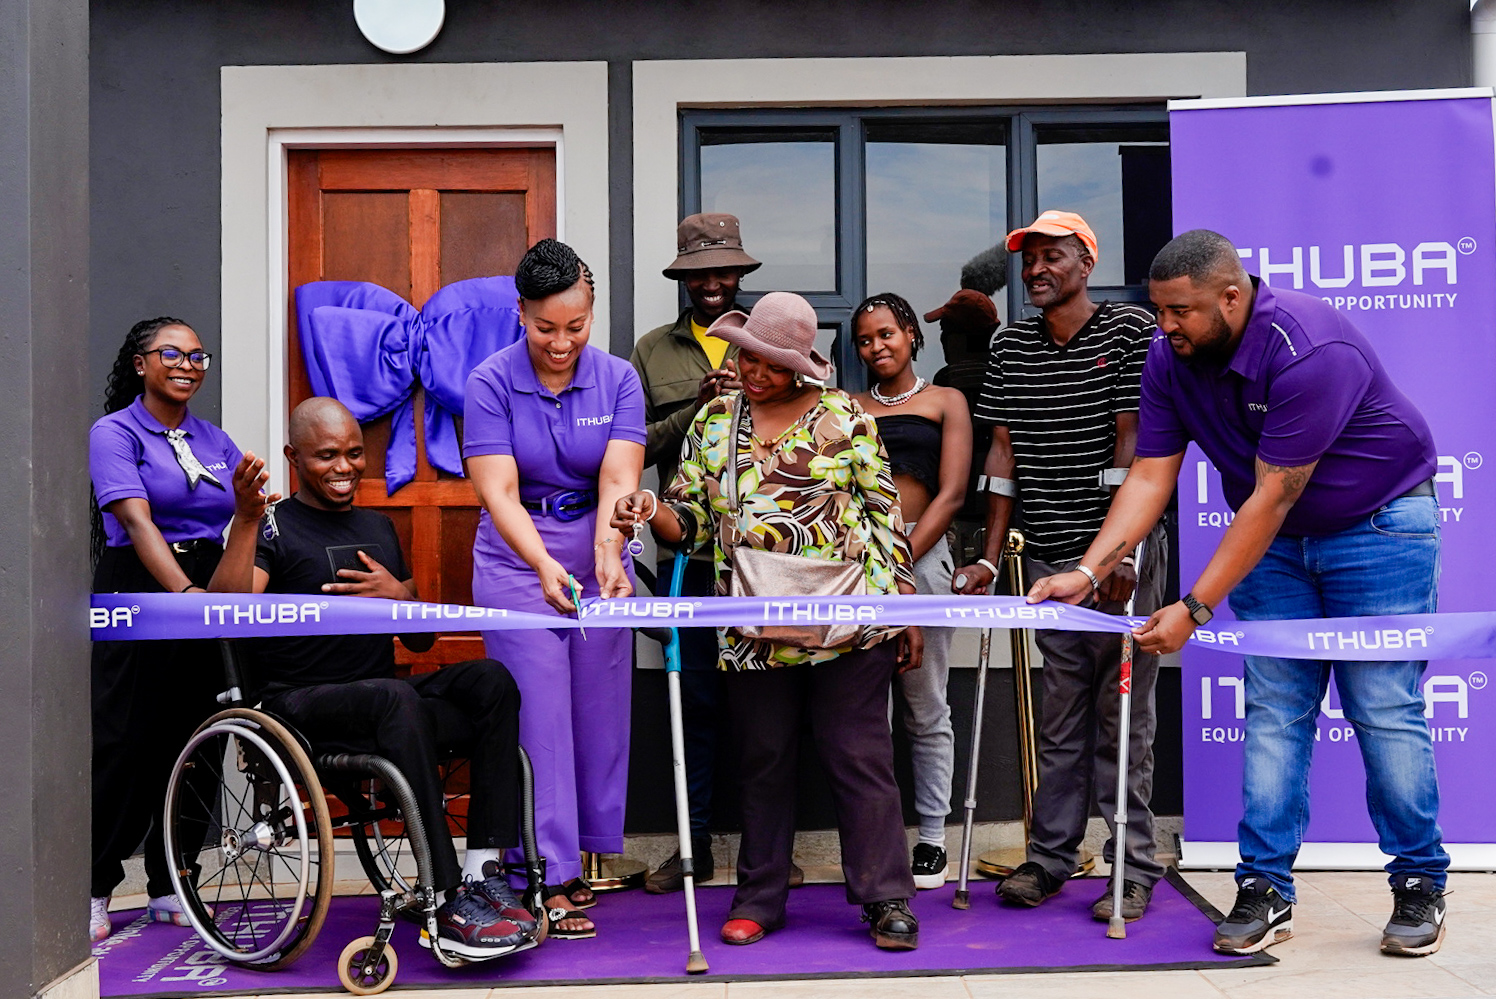 ITHUBA Brings Holiday Joy with Unprecedented Housing Initiative